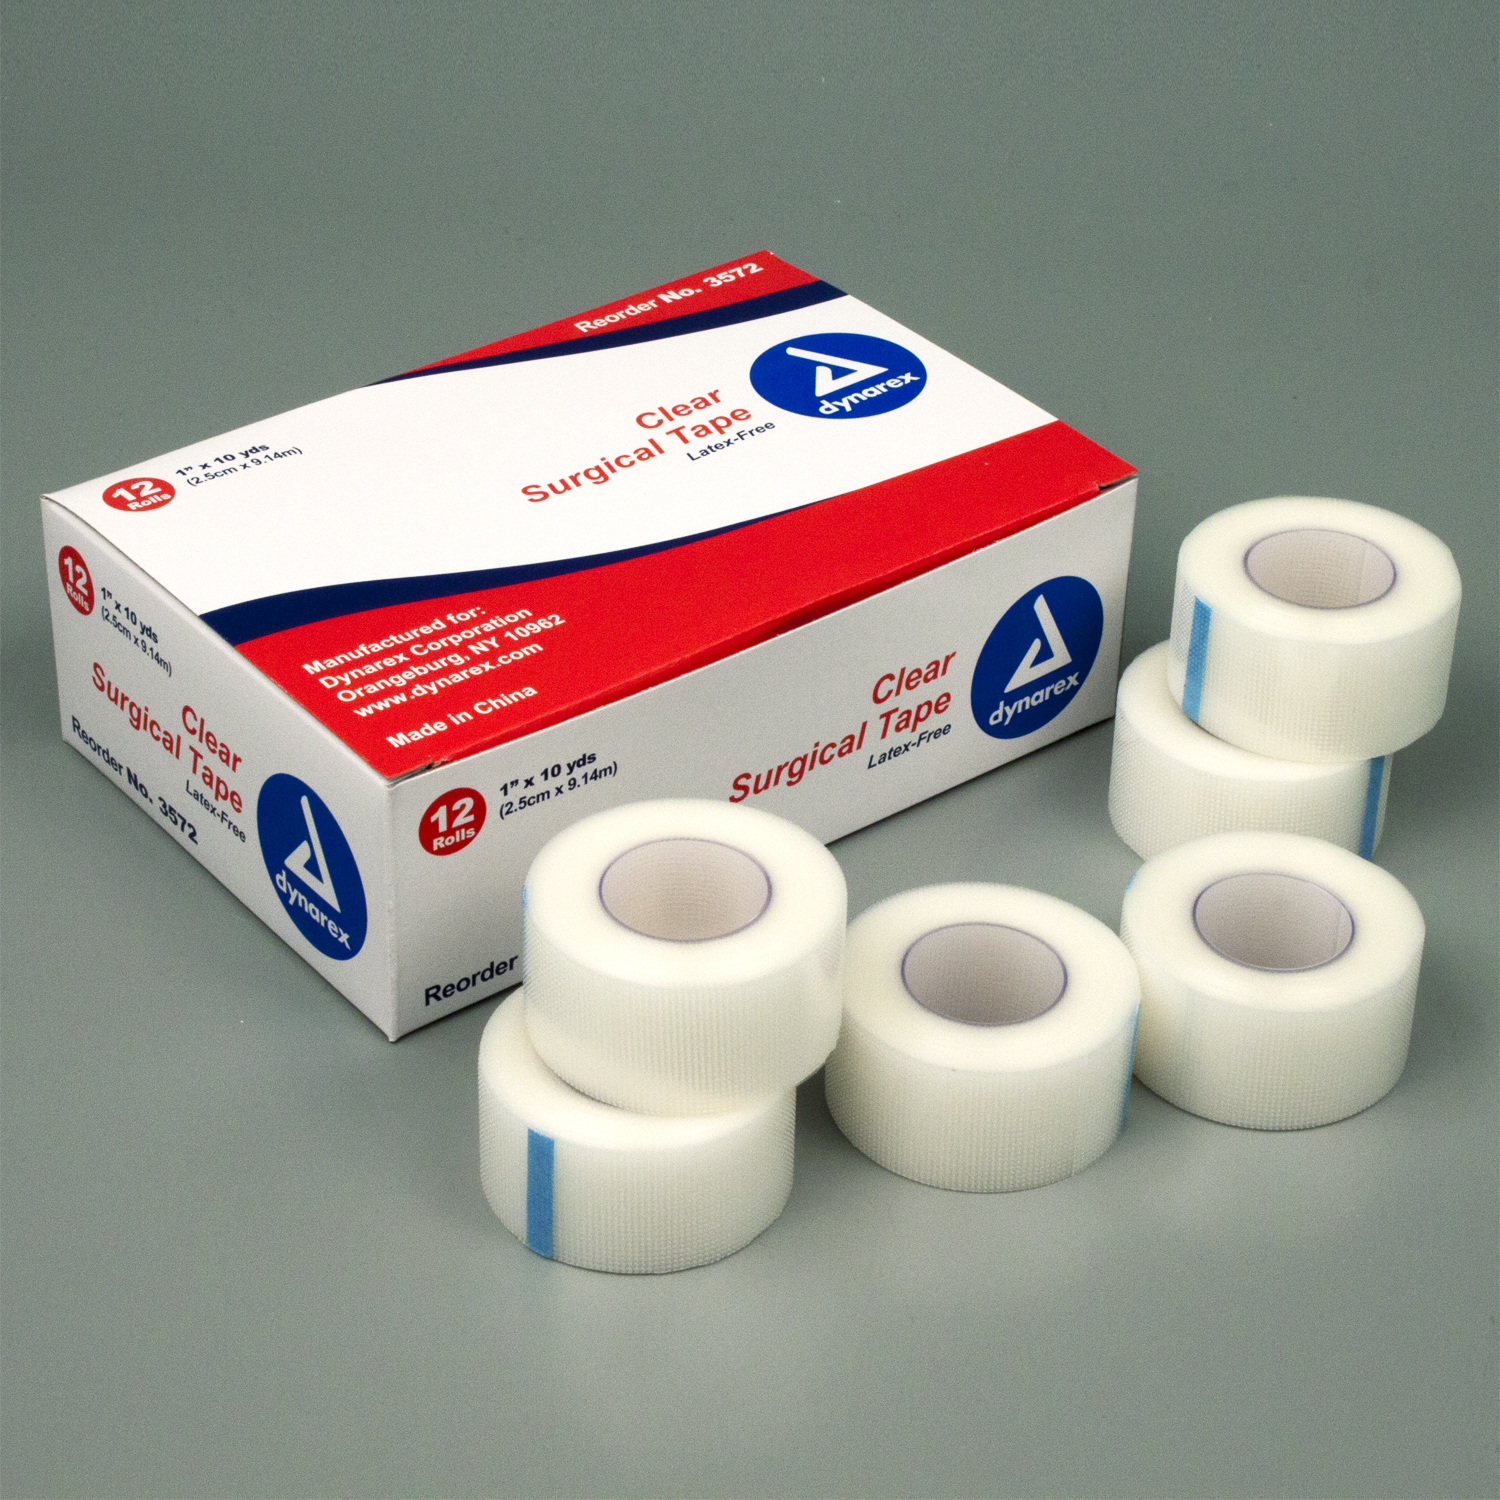 1 Inch Clear Surgical Tape: Single Roll